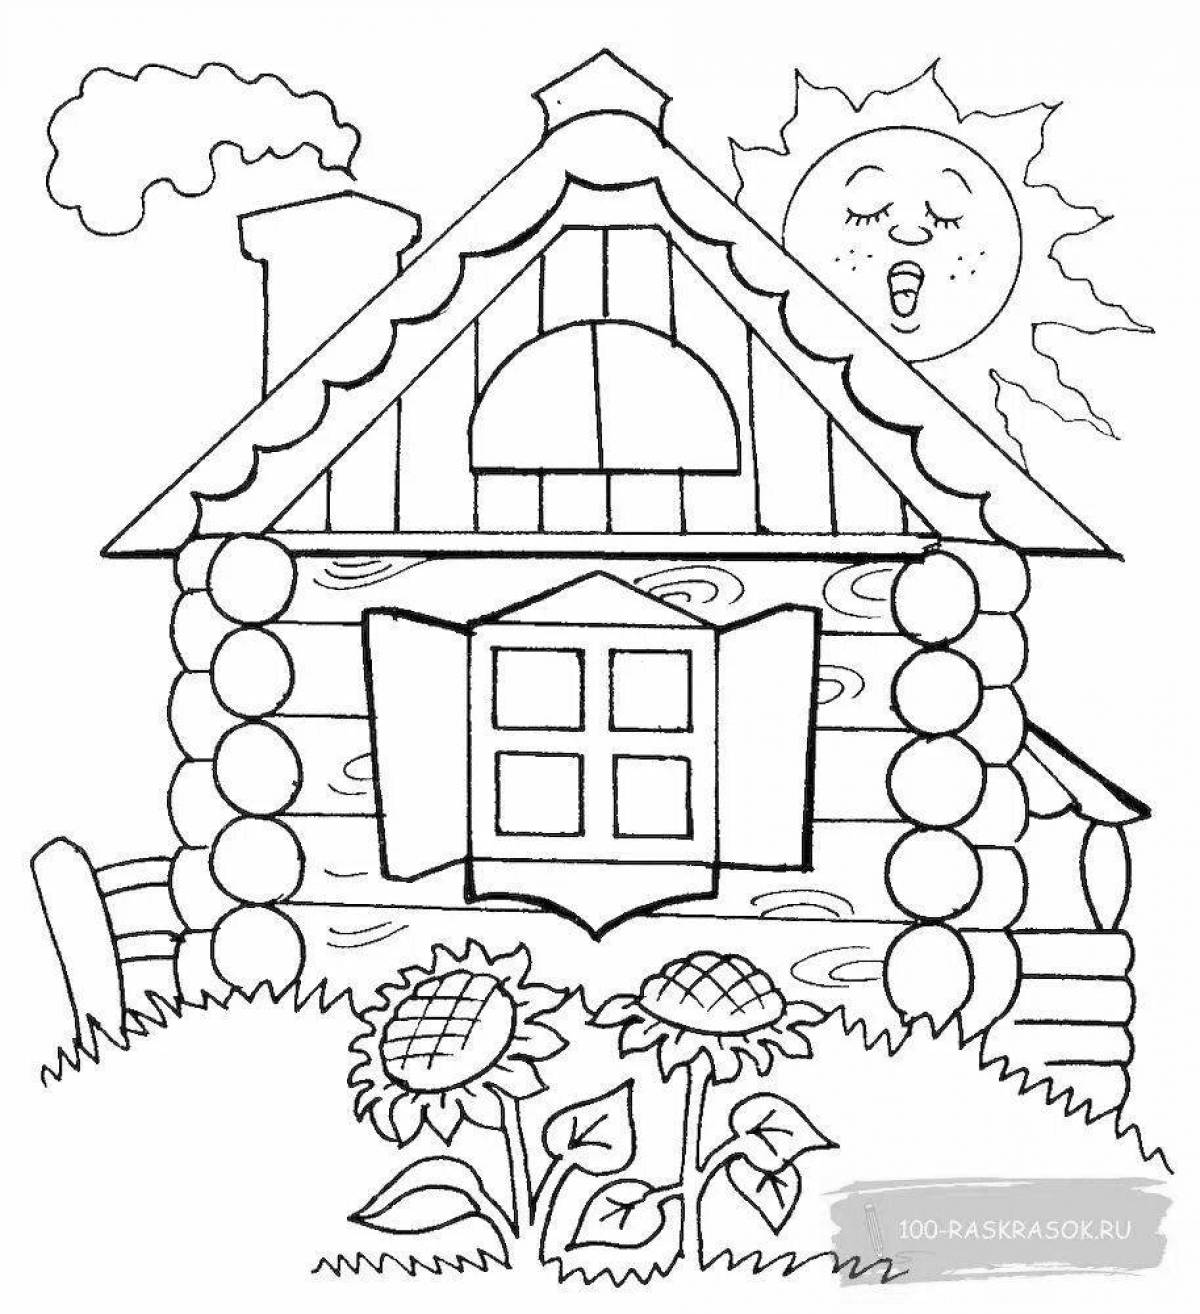 Colouring a magnificent wooden house for children